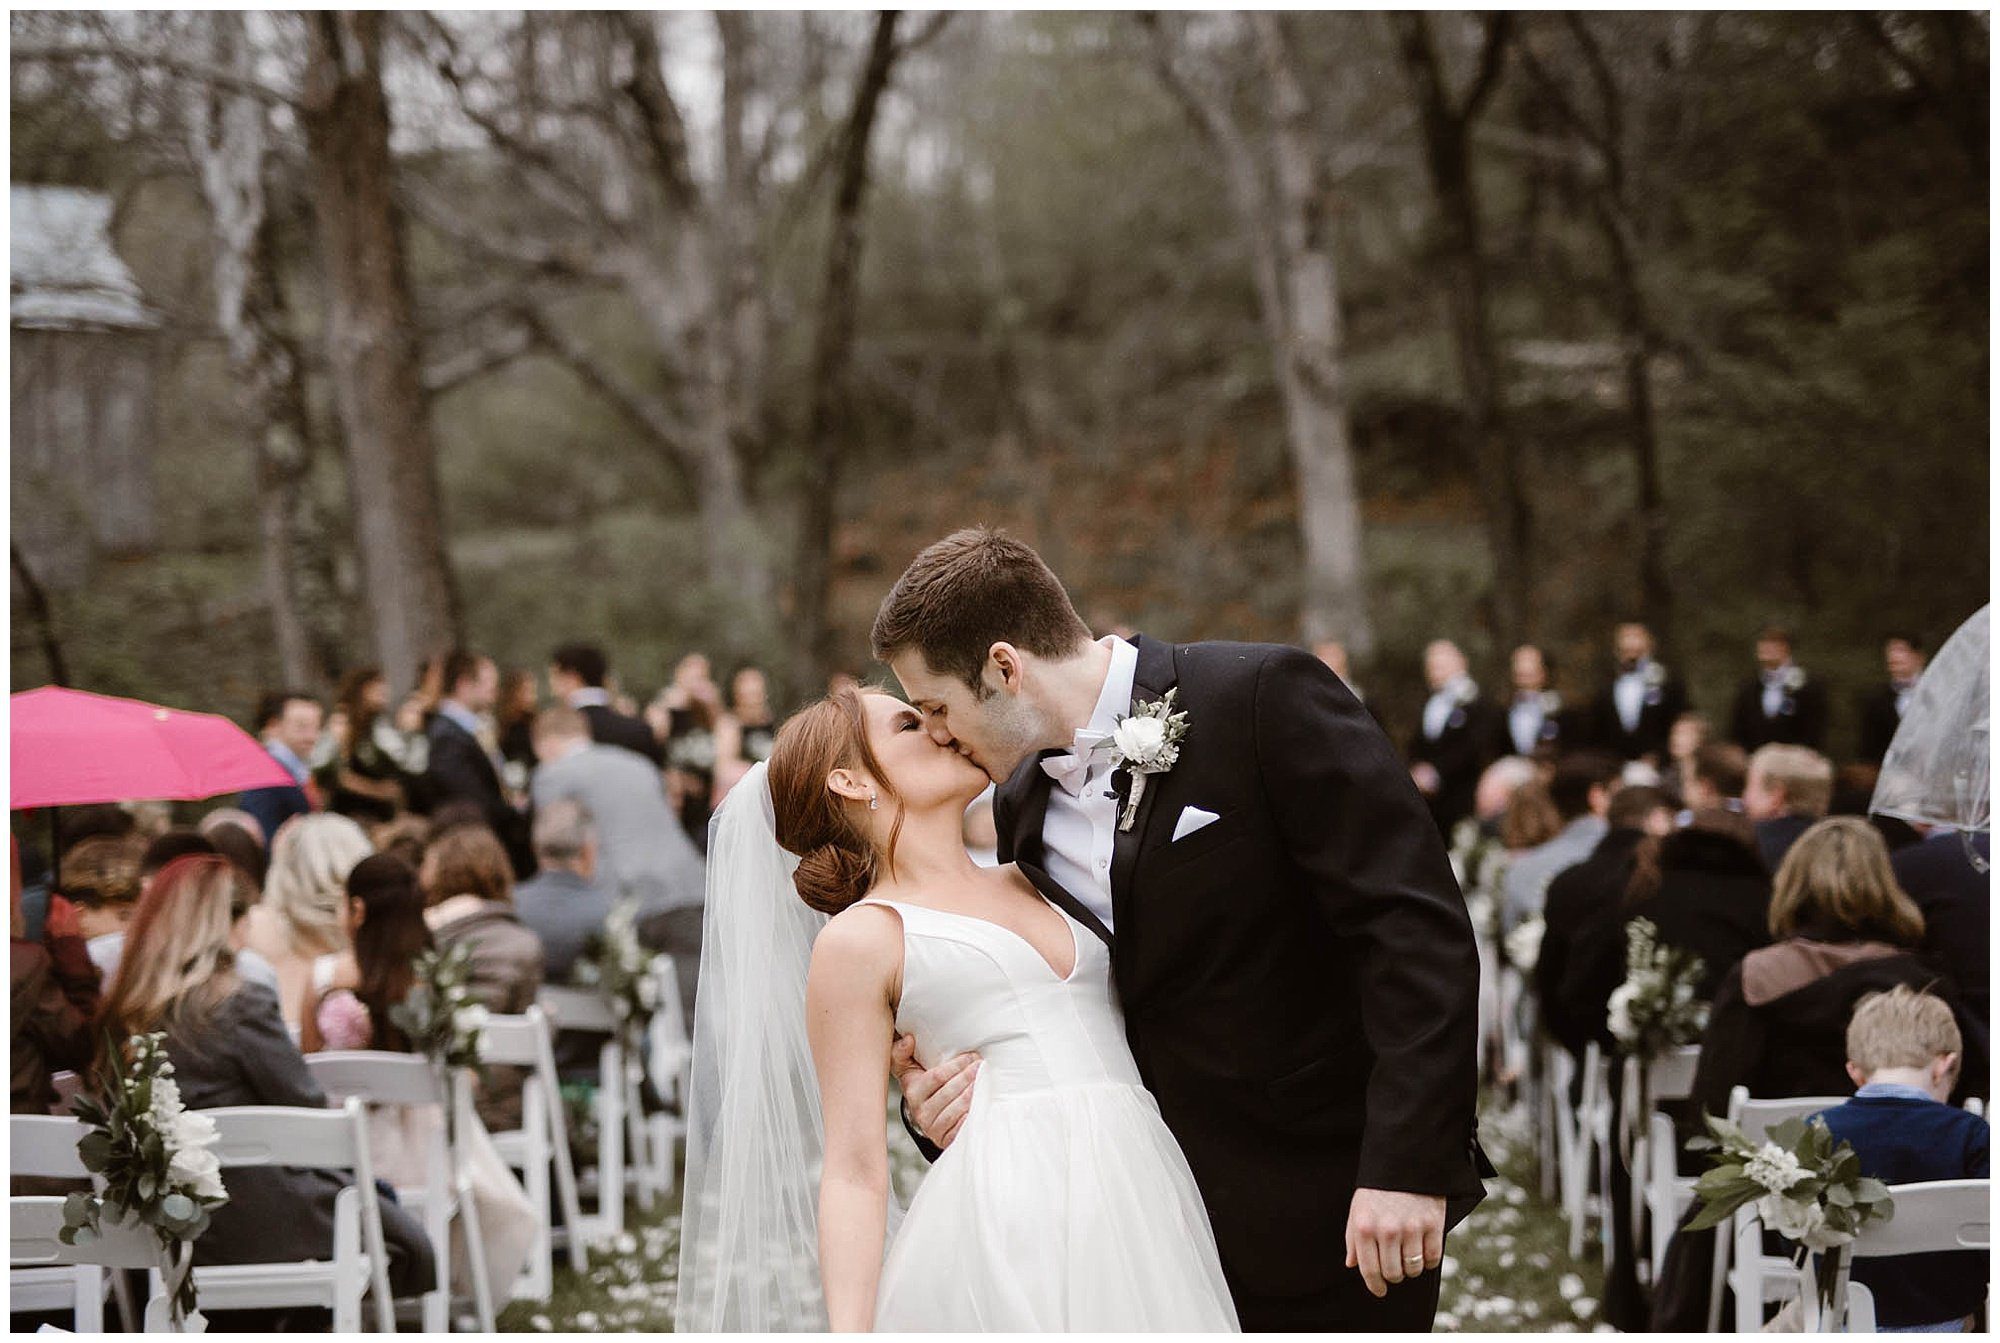 Bride and Groom kissing on wedding day at Dara's Garden